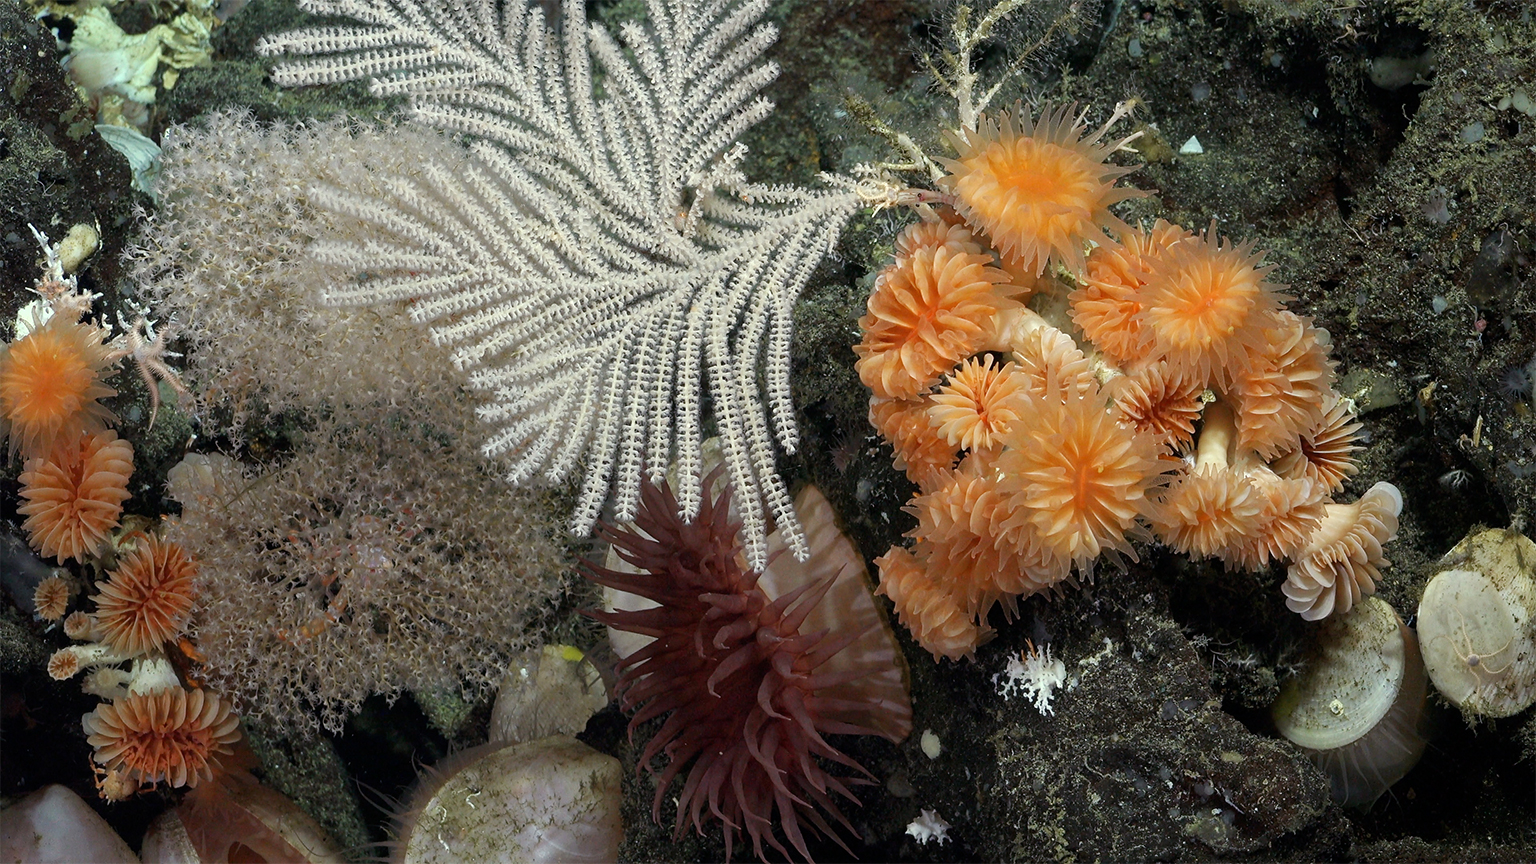 Corals documented by ROV SuBastian as it dove at a site on the northern side of Isabela Island.